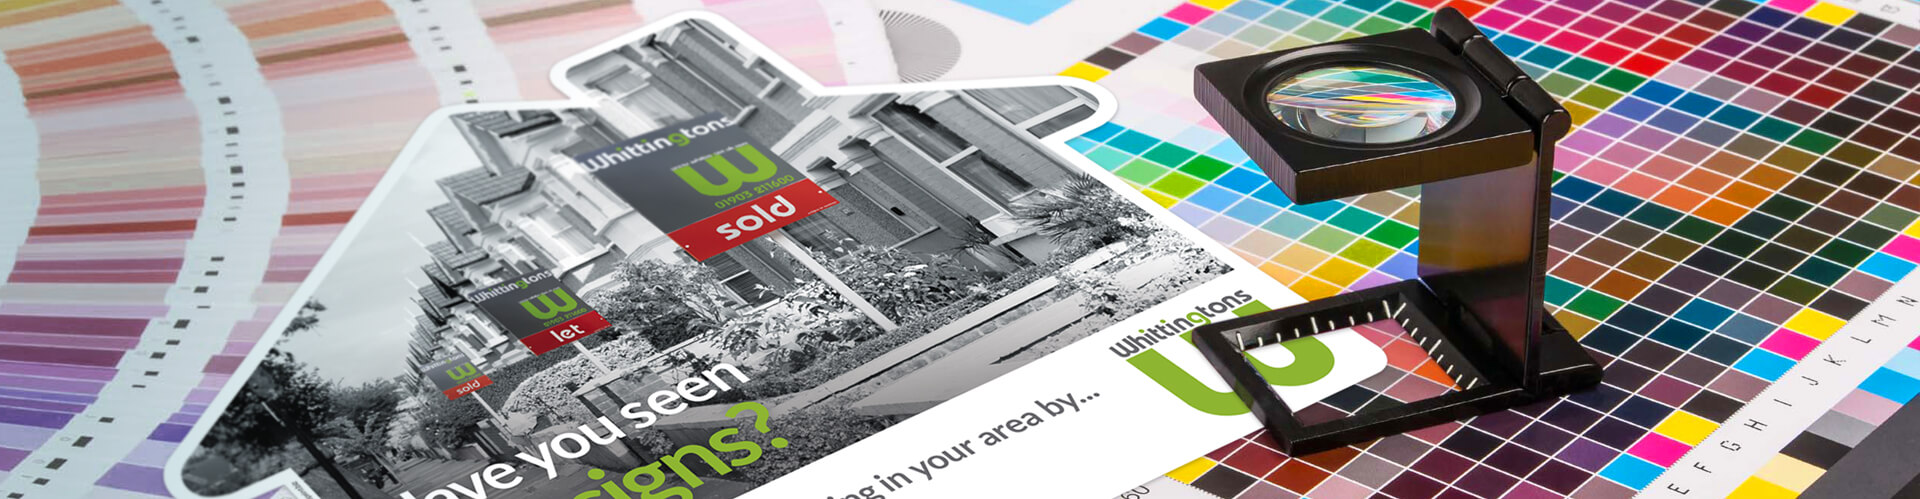 Printing estate agents leaflets and other popular marketing materials.